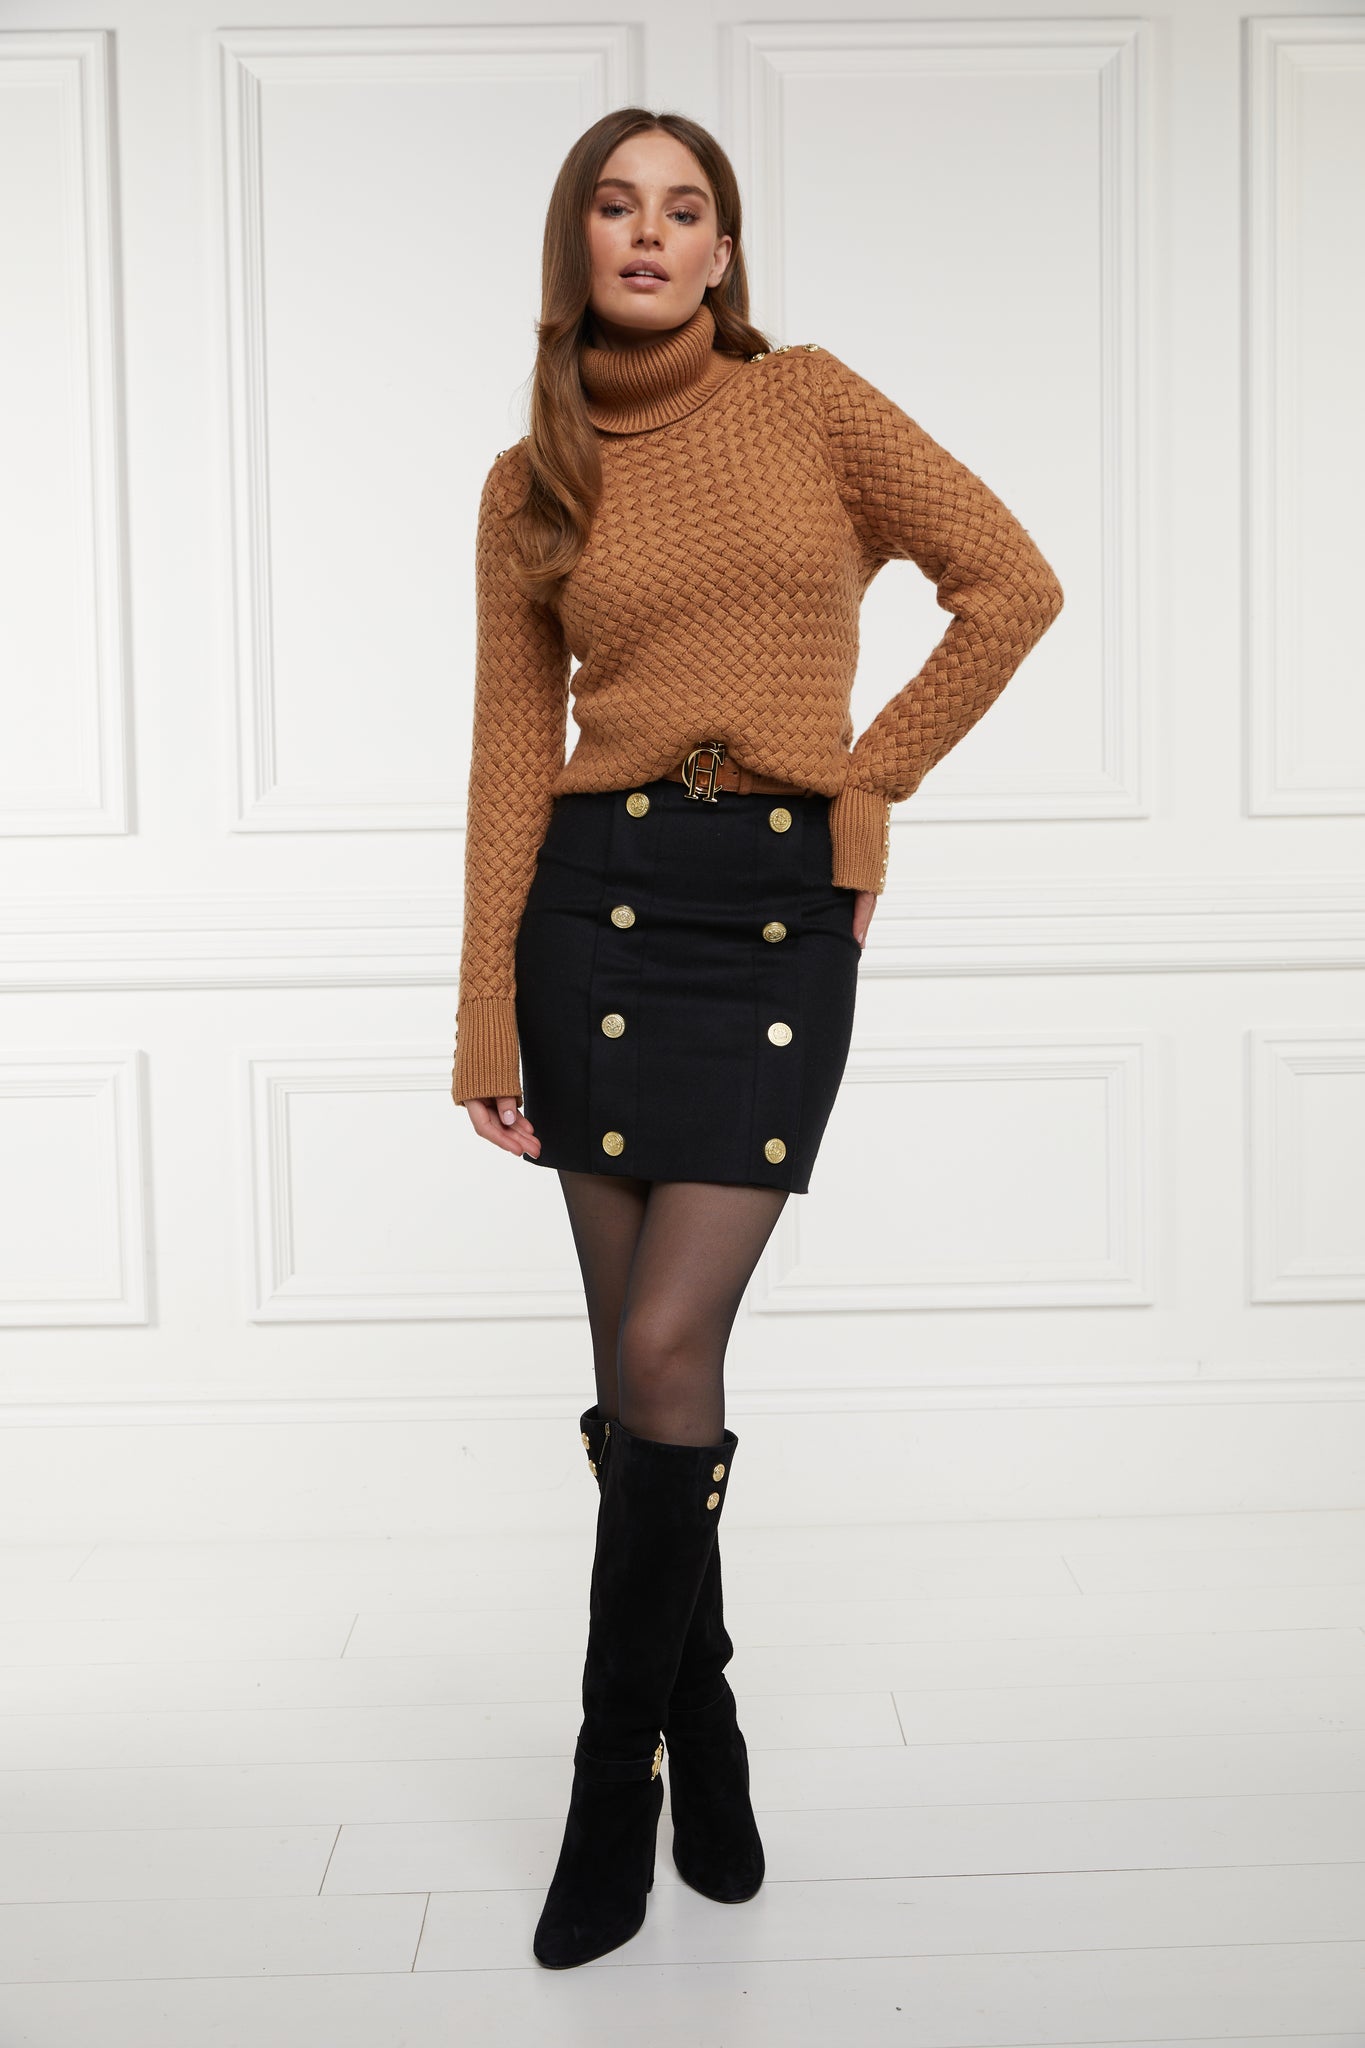 womens black and tan wool pencil mini skirt with concealed zip fastening on centre back and gold rivets down front